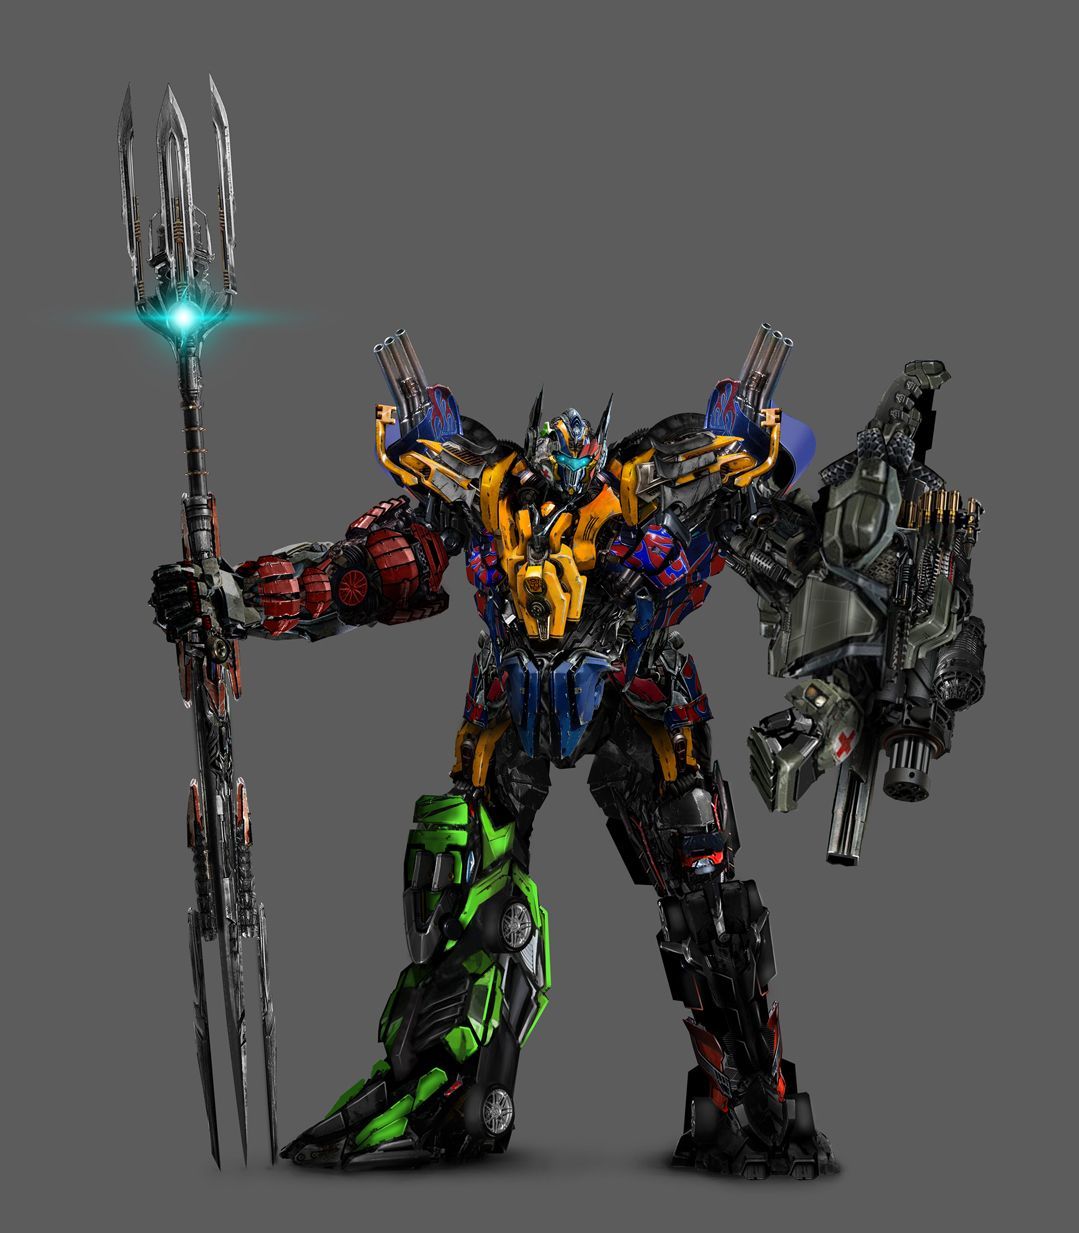 Click This Image To Show The Full Size Version. Transformers Optimus, Optimus Prime Wallpaper Transformers, Transformers Autobots